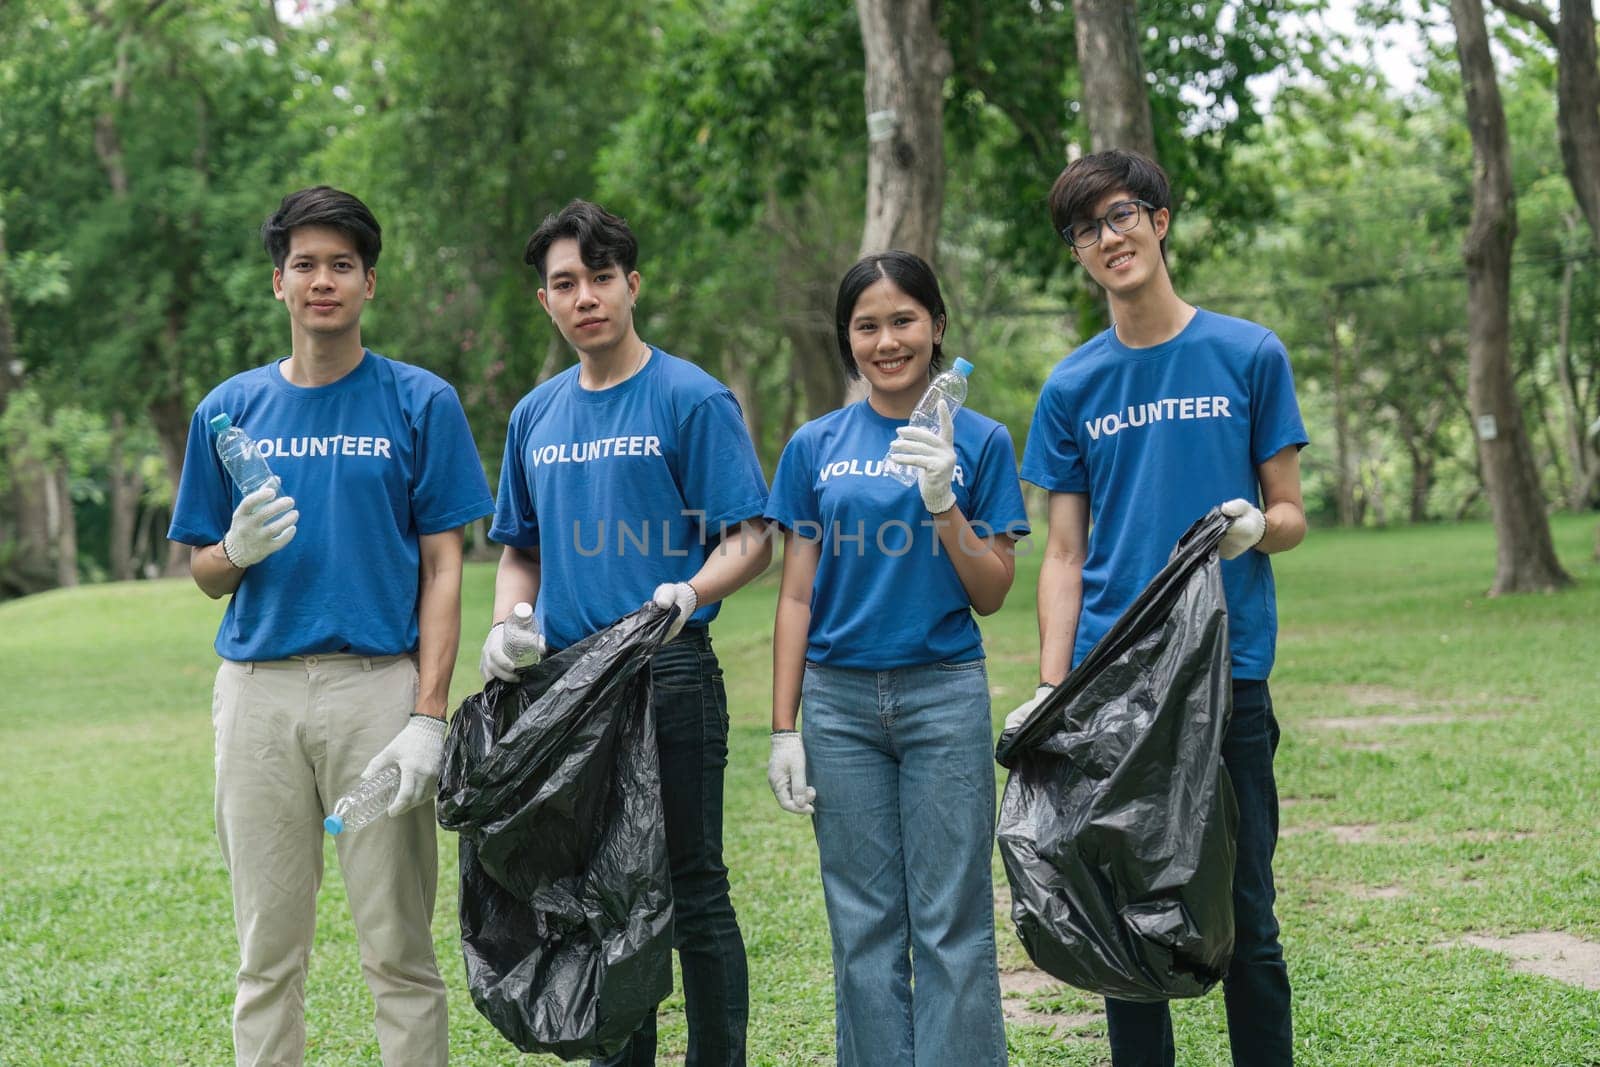 Team volunteers collecting garbage in public park. Environmental protection Concept.